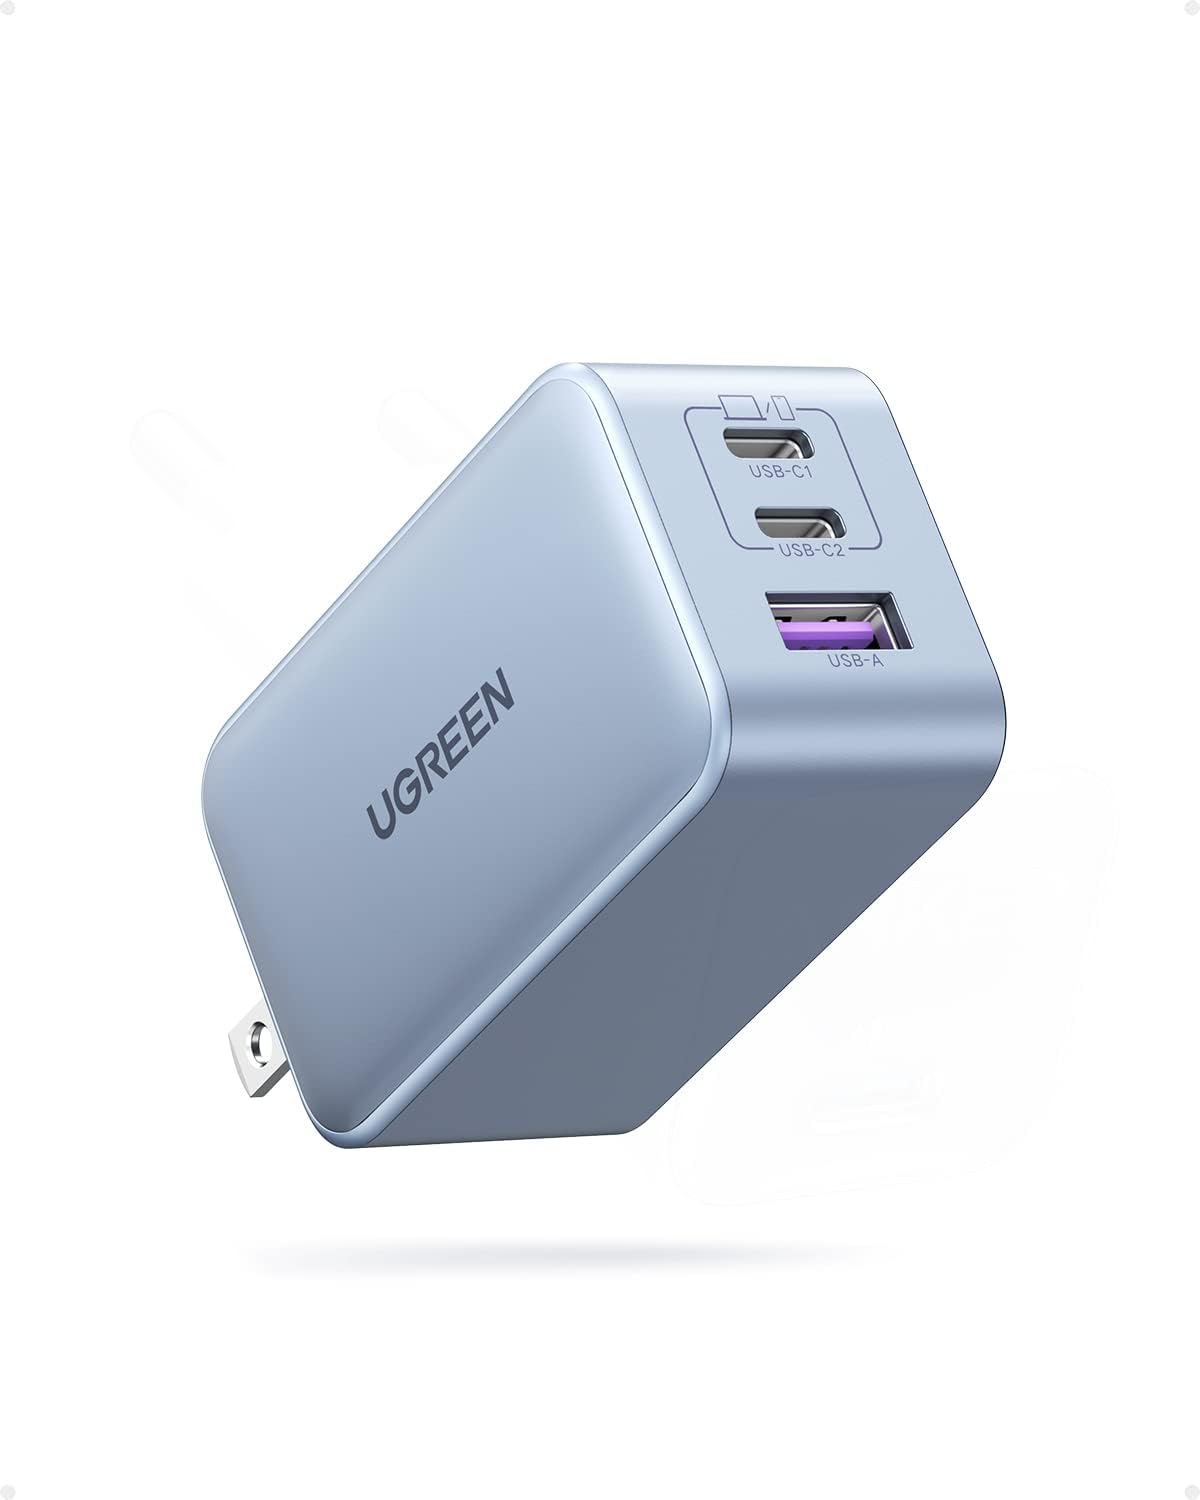 Save Big on UGREEN 65W USB C Charger - Limited-Time Discount!